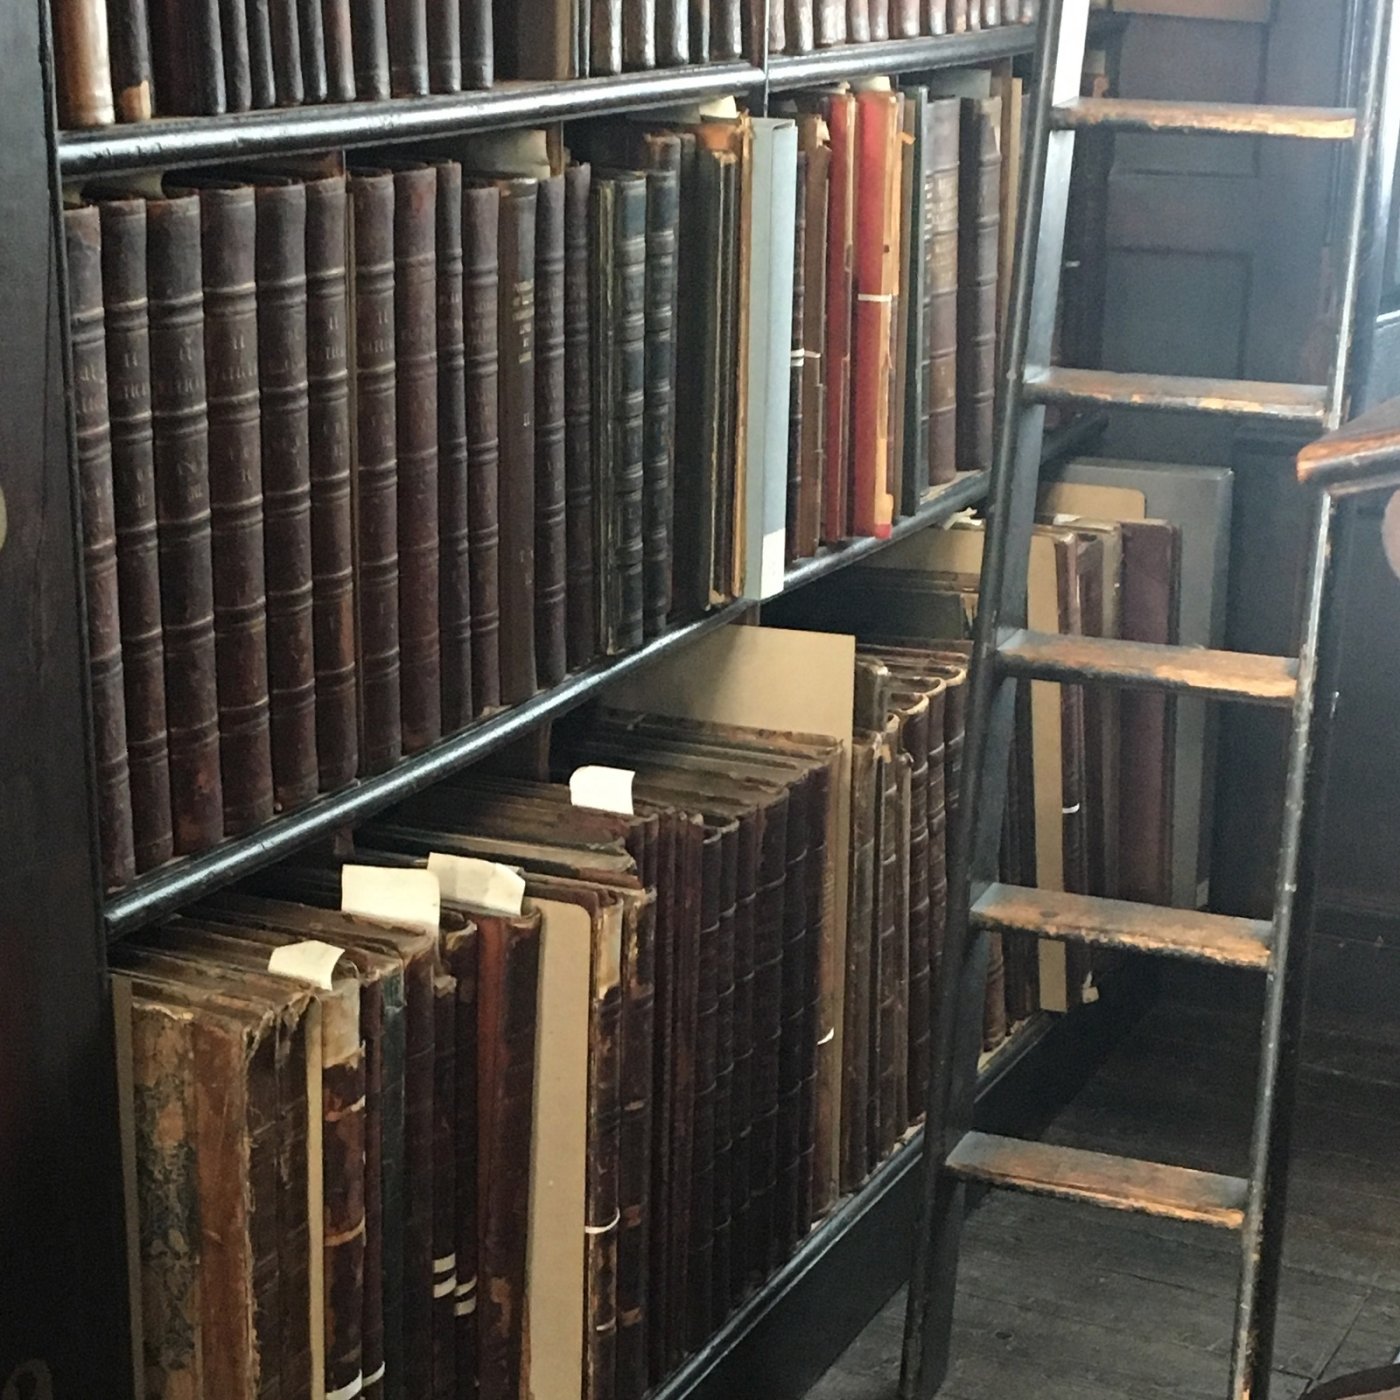 Shelves of old books in a library